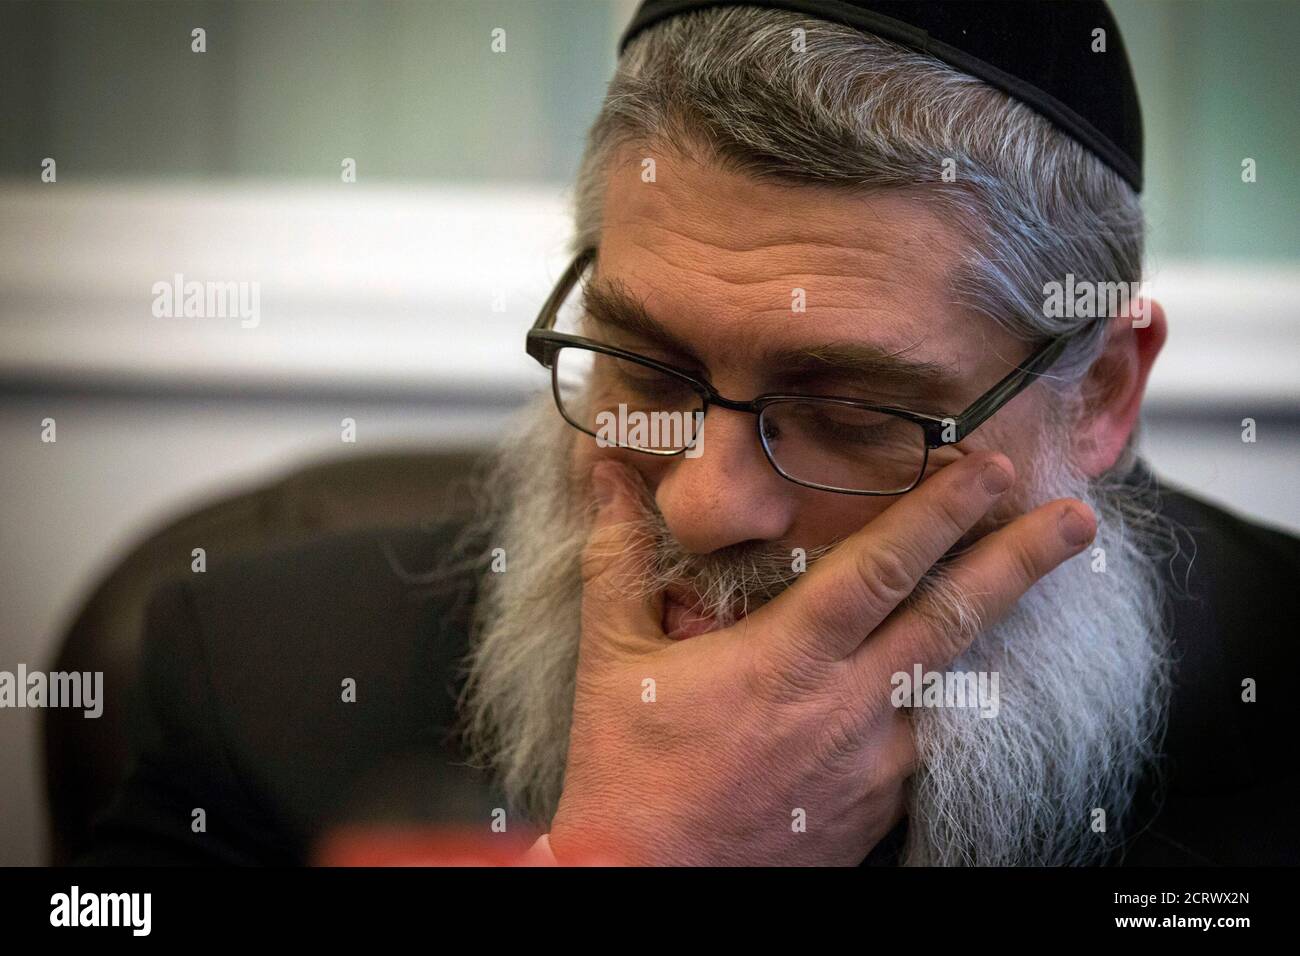 Rabbi Yaakov Dov Bleich, Chief Rabbi of Ukraine, pauses during a news conference in New York March 3, 2014. Bleich is to meet with U.S. Secretary of State John Kerry and other political and religious leaders on Tuesday in Ukraine.  REUTERS/Brendan McDermid (UNITED STATES - Tags: RELIGION POLITICS MILITARY CIVIL UNREST CONFLICT) Stock Photo